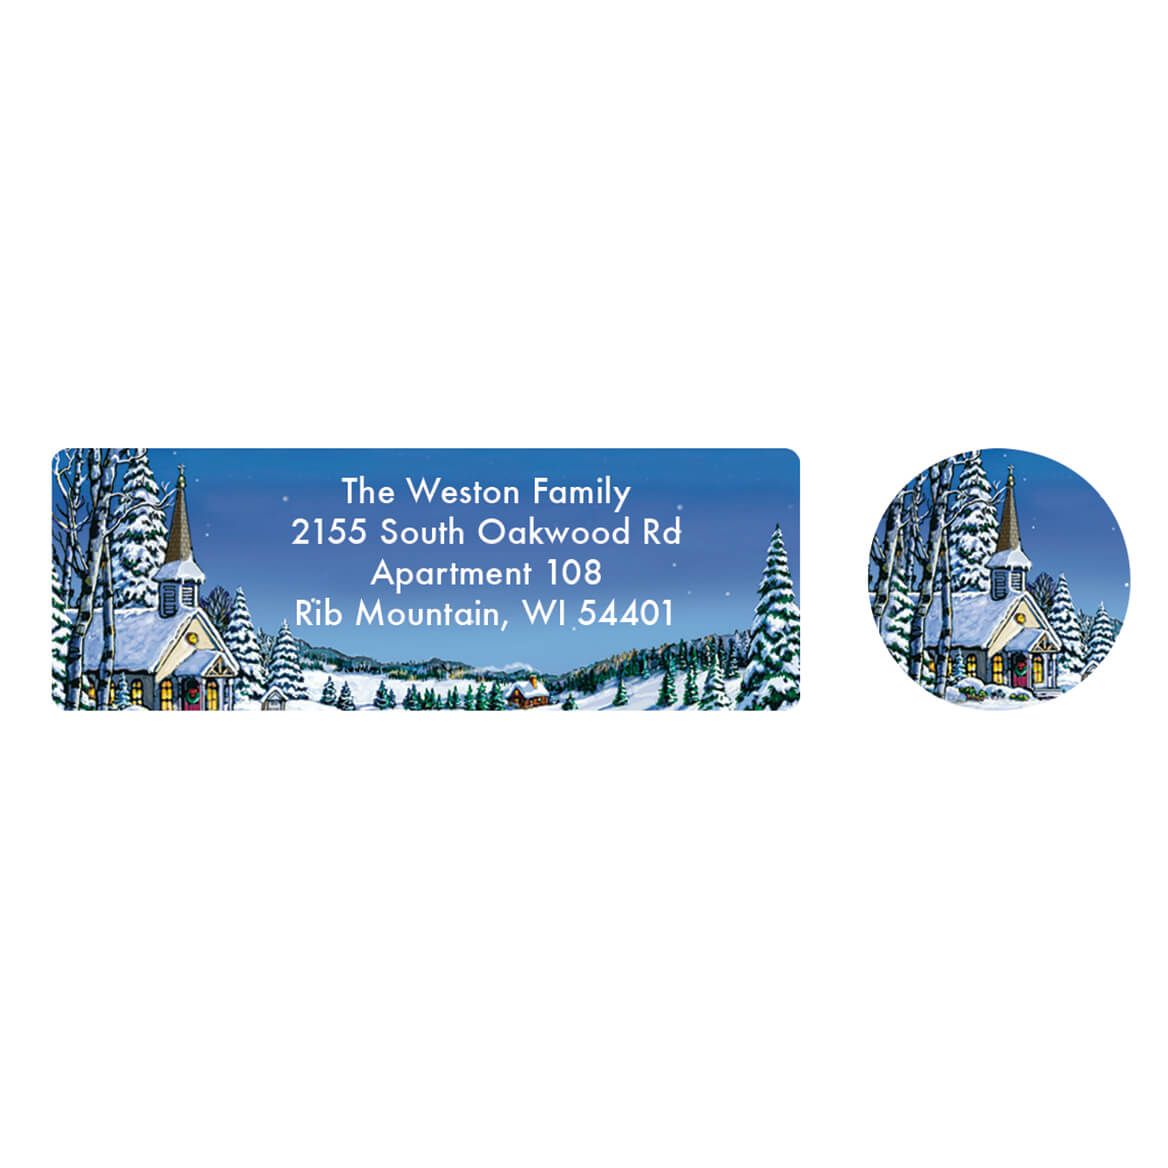 Personalized Remembering You Address Labels & Envelope Seal 20 + '-' + 364757